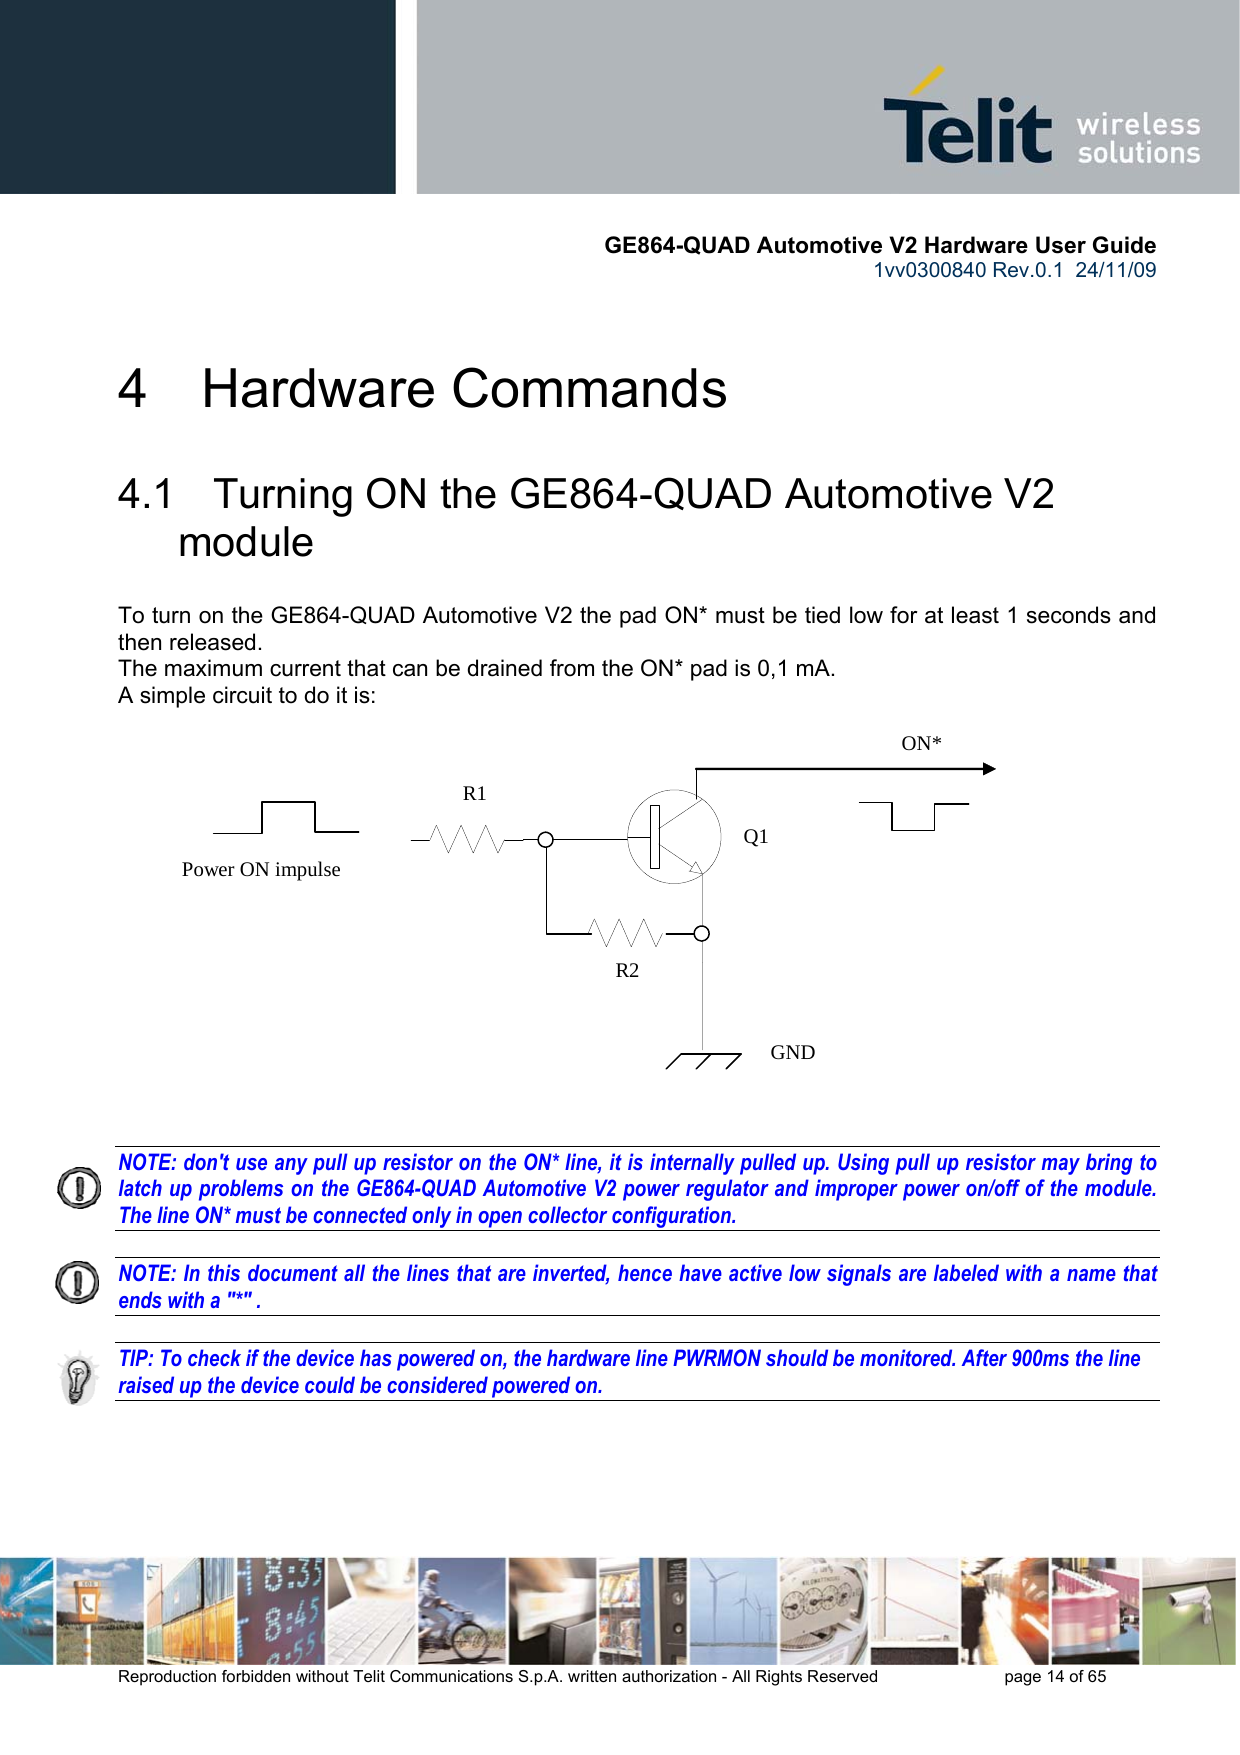       GE864-QUAD Automotive V2 Hardware User Guide 1vv0300840 Rev.0.1  24/11/09      Reproduction forbidden without Telit Communications S.p.A. written authorization - All Rights Reserved    page 14 of 65  4  Hardware Commands 4.1   Turning ON the GE864-QUAD Automotive V2 module To turn on the GE864-QUAD Automotive V2 the pad ON* must be tied low for at least 1 seconds and then released. The maximum current that can be drained from the ON* pad is 0,1 mA. A simple circuit to do it is:   NOTE: don&apos;t use any pull up resistor on the ON* line, it is internally pulled up. Using pull up resistor may bring to latch up problems on the GE864-QUAD Automotive V2 power regulator and improper power on/off of the module. The line ON* must be connected only in open collector configuration.  NOTE: In this document all the lines that are inverted, hence have active low signals are labeled with a name that ends with a &quot;*&quot; .  TIP: To check if the device has powered on, the hardware line PWRMON should be monitored. After 900ms the line raised up the device could be considered powered on.      ON* Power ON impulse   GND R1 R2 Q1 